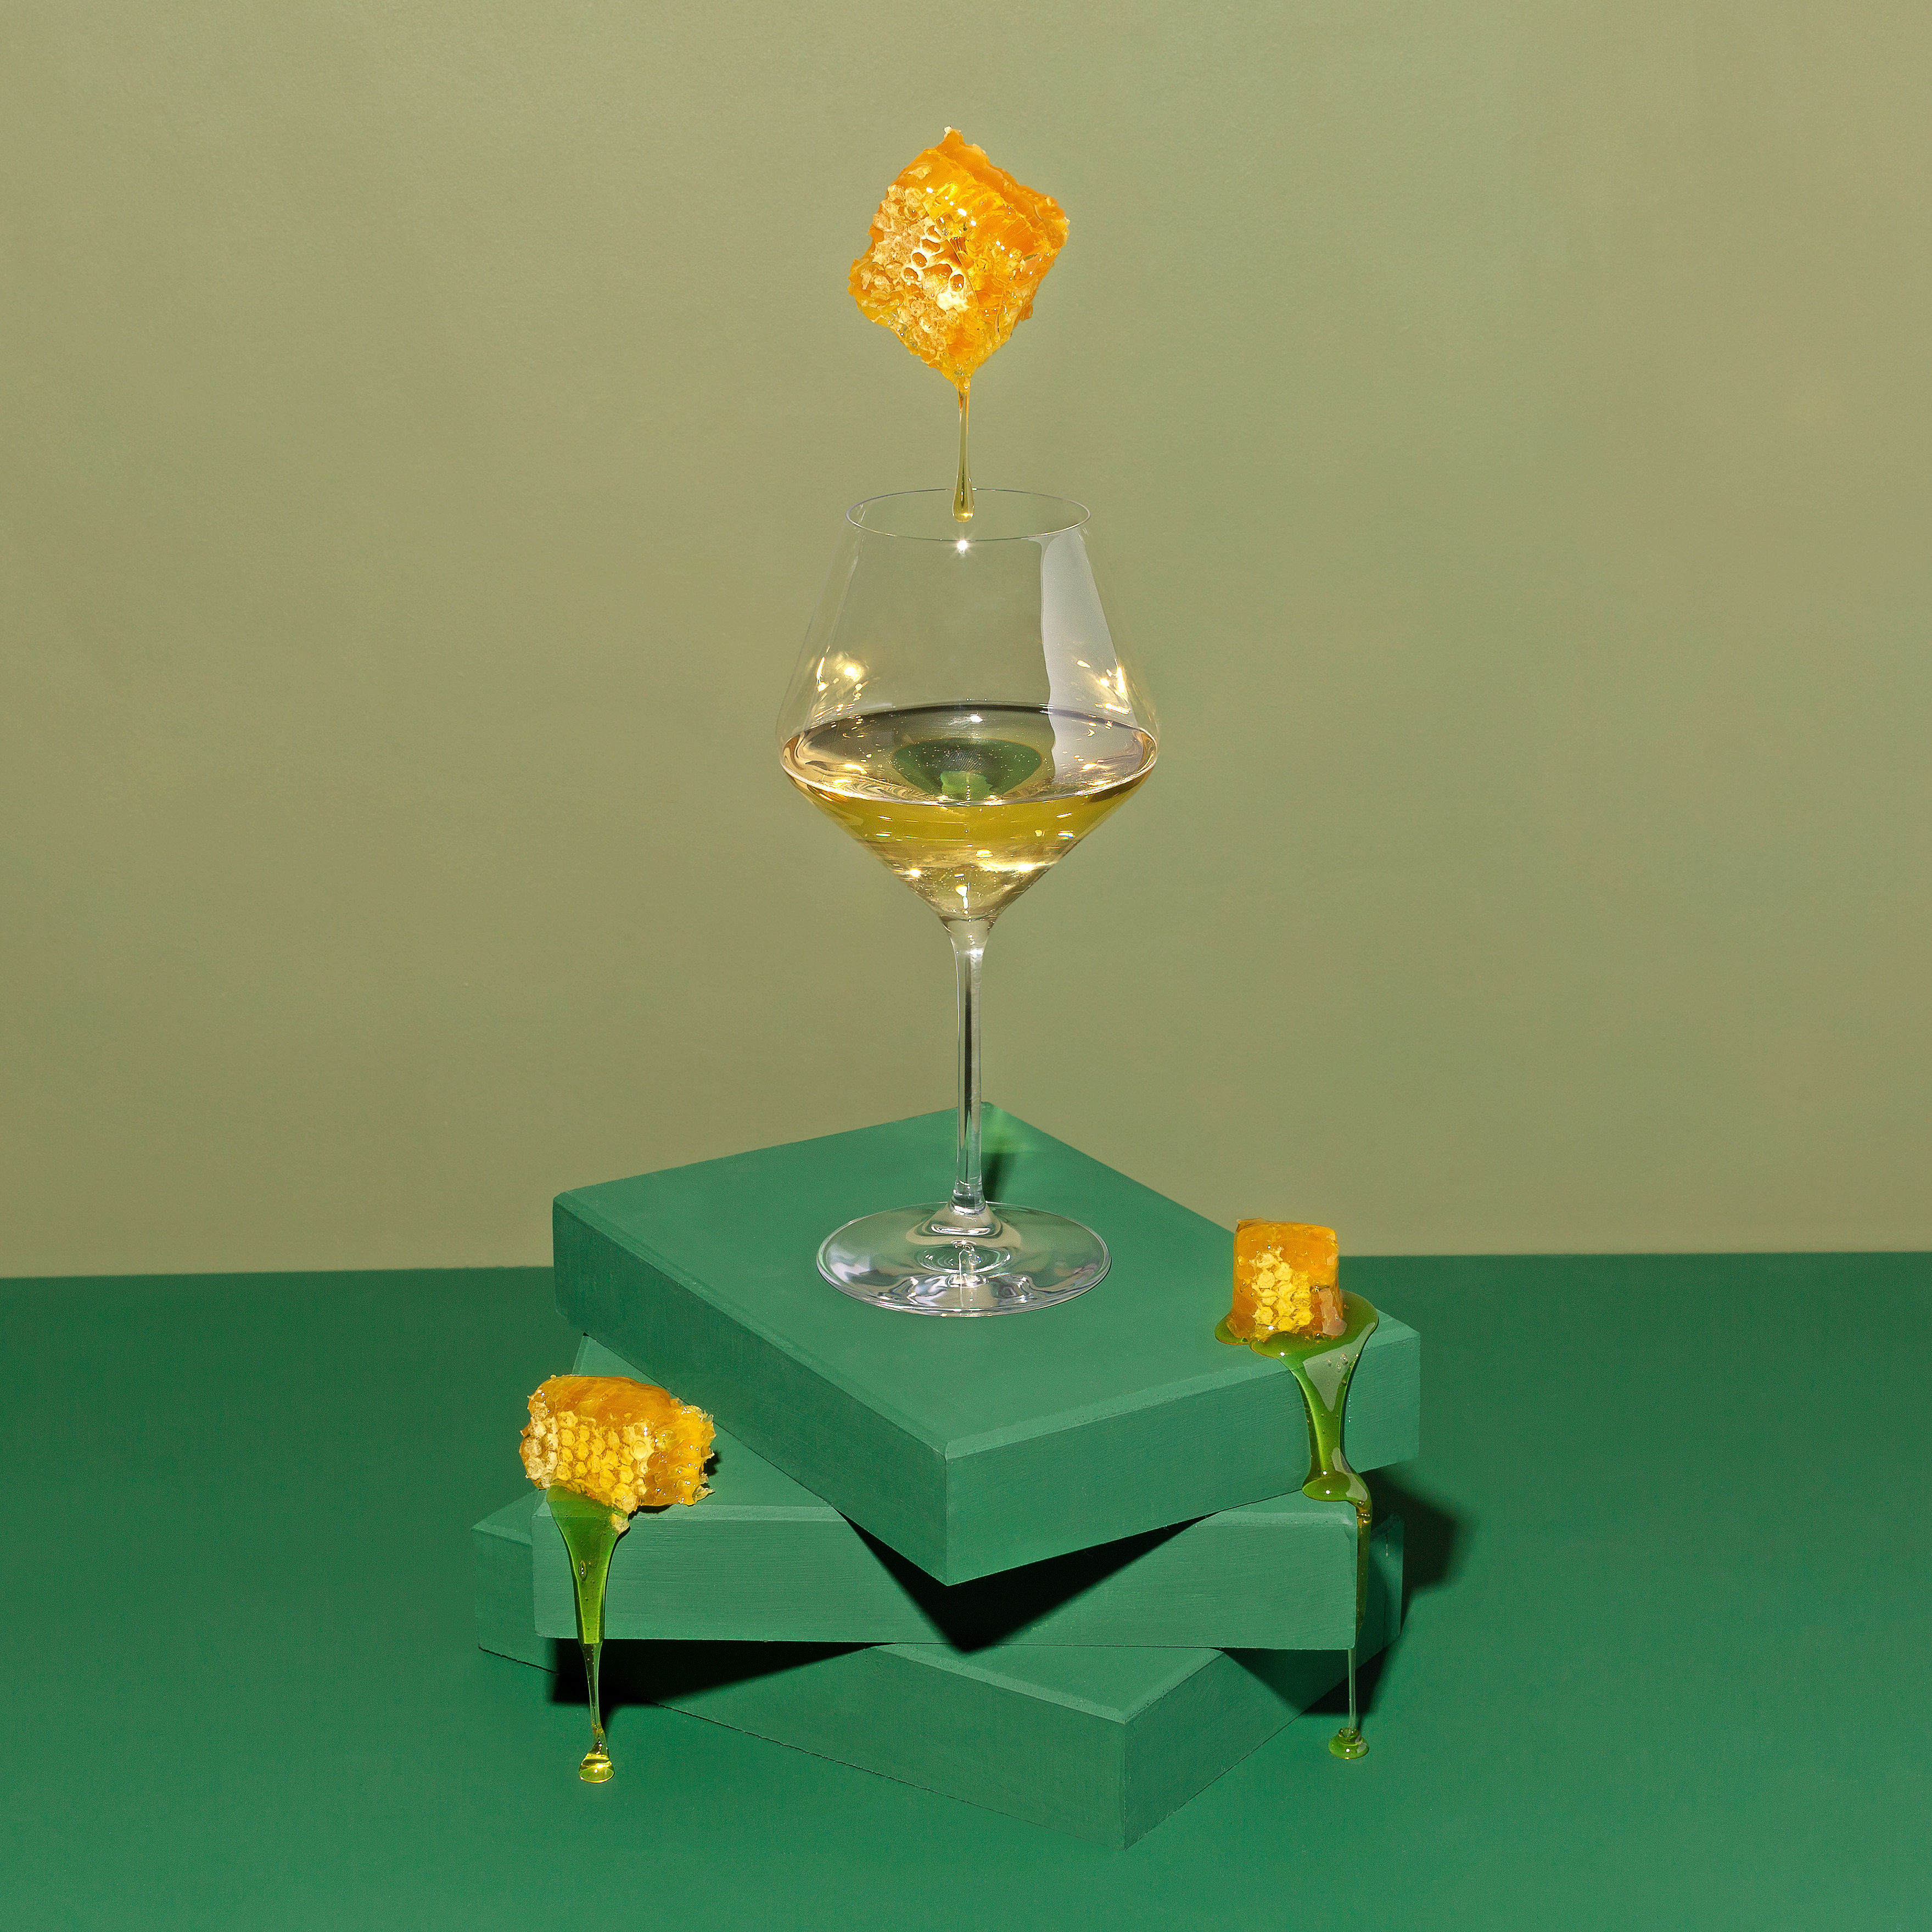 Balancing act with a white wine glass and a honeycomb hovering above and dripping honey into the wine glass